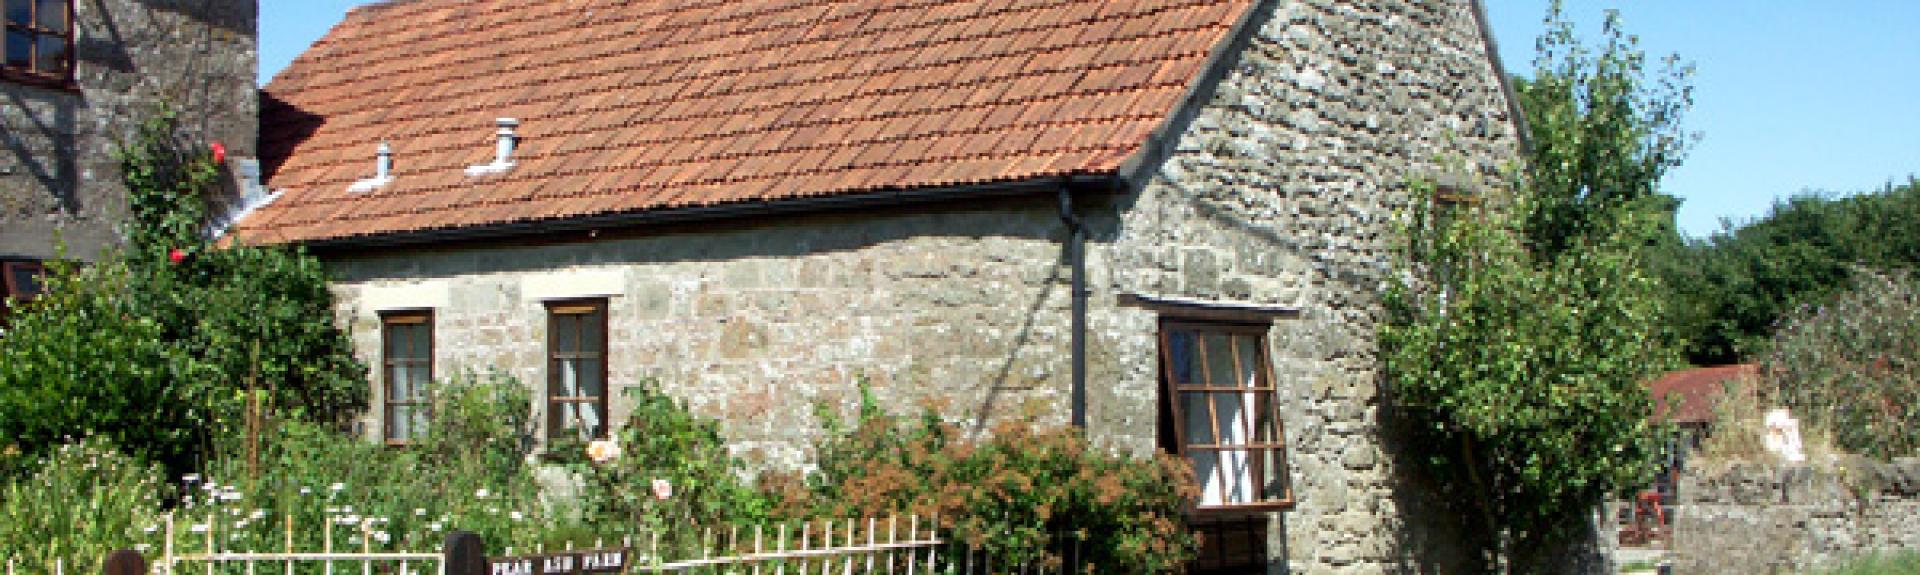 A stone-built somesret holiday cottage with a mature garden overlooks a quiet lane.